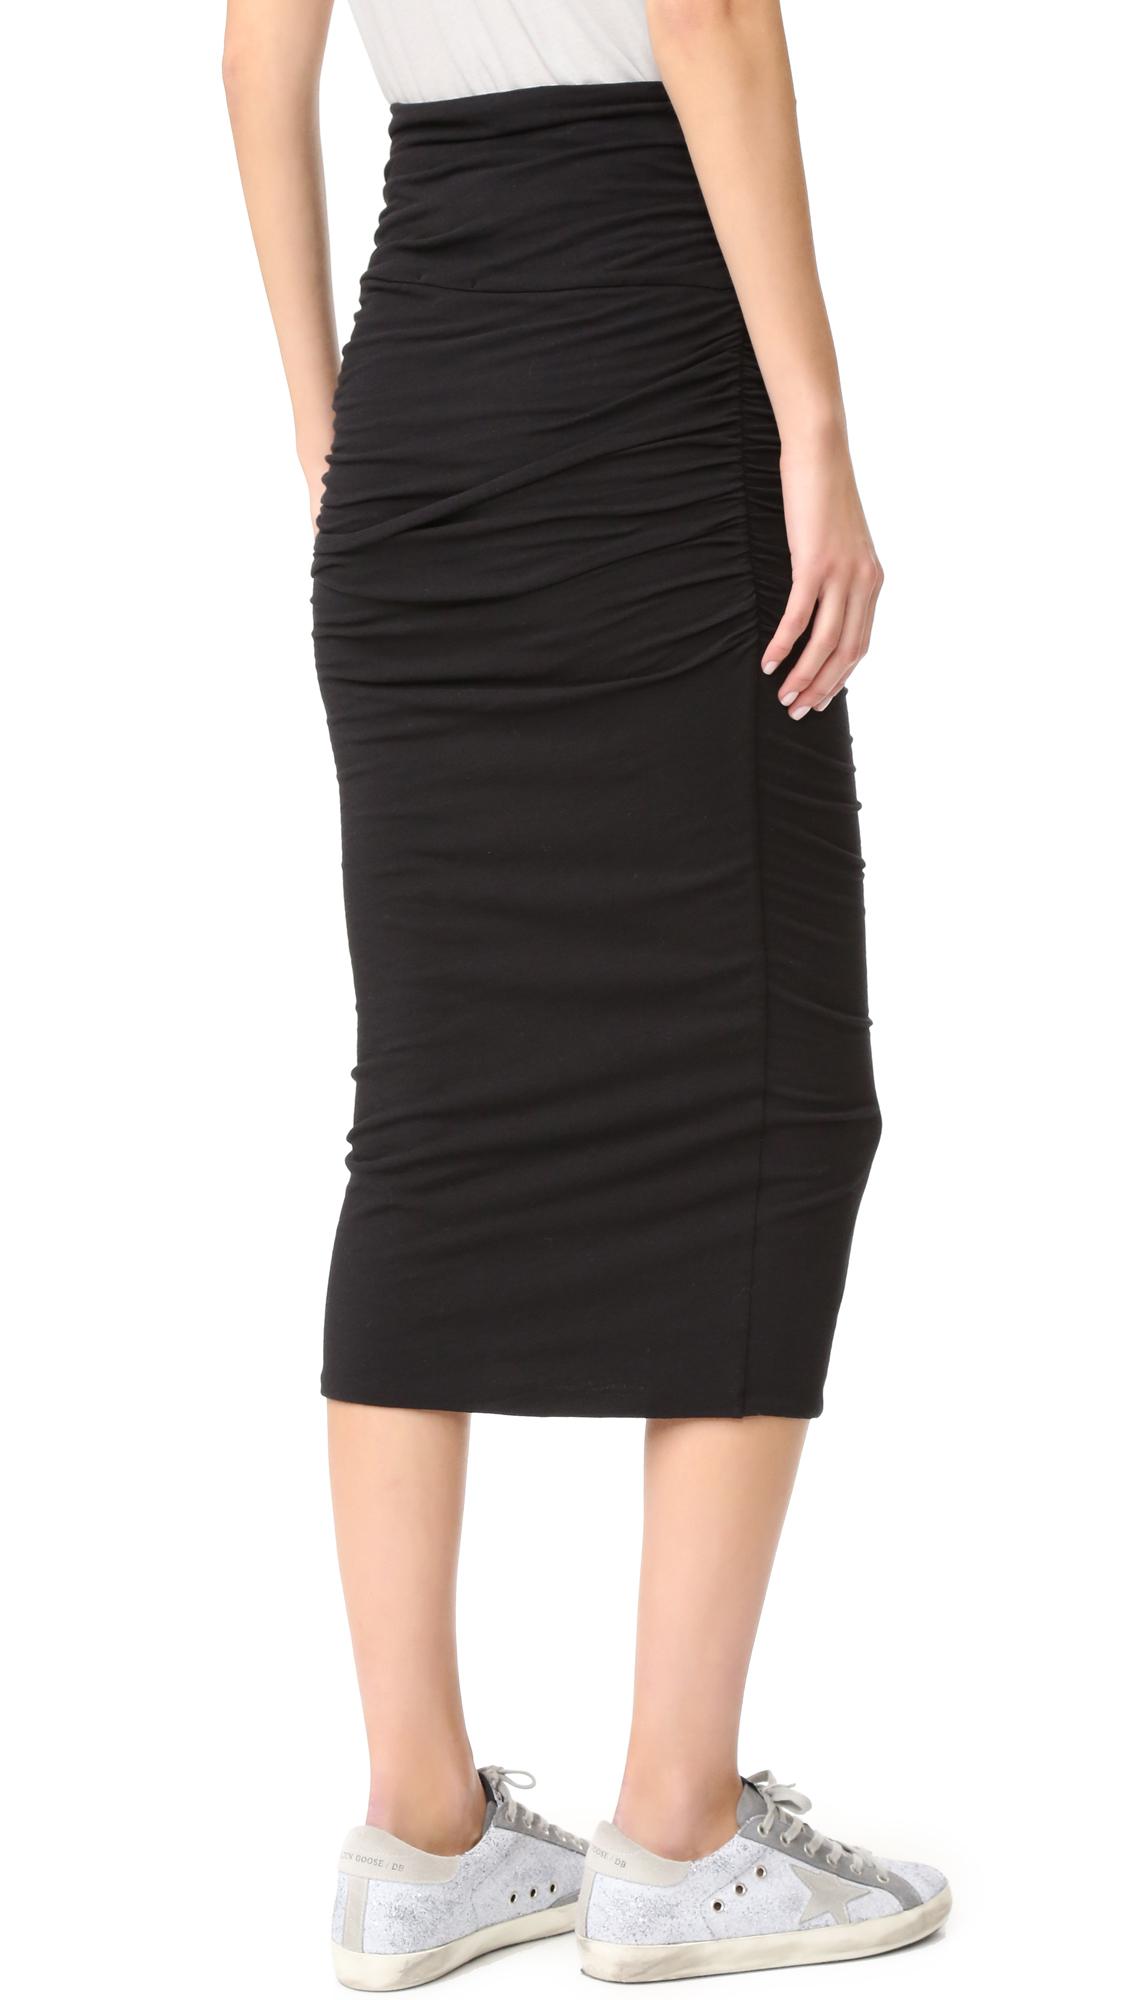 James Perse Cotton Tube Skirt in Black - Lyst